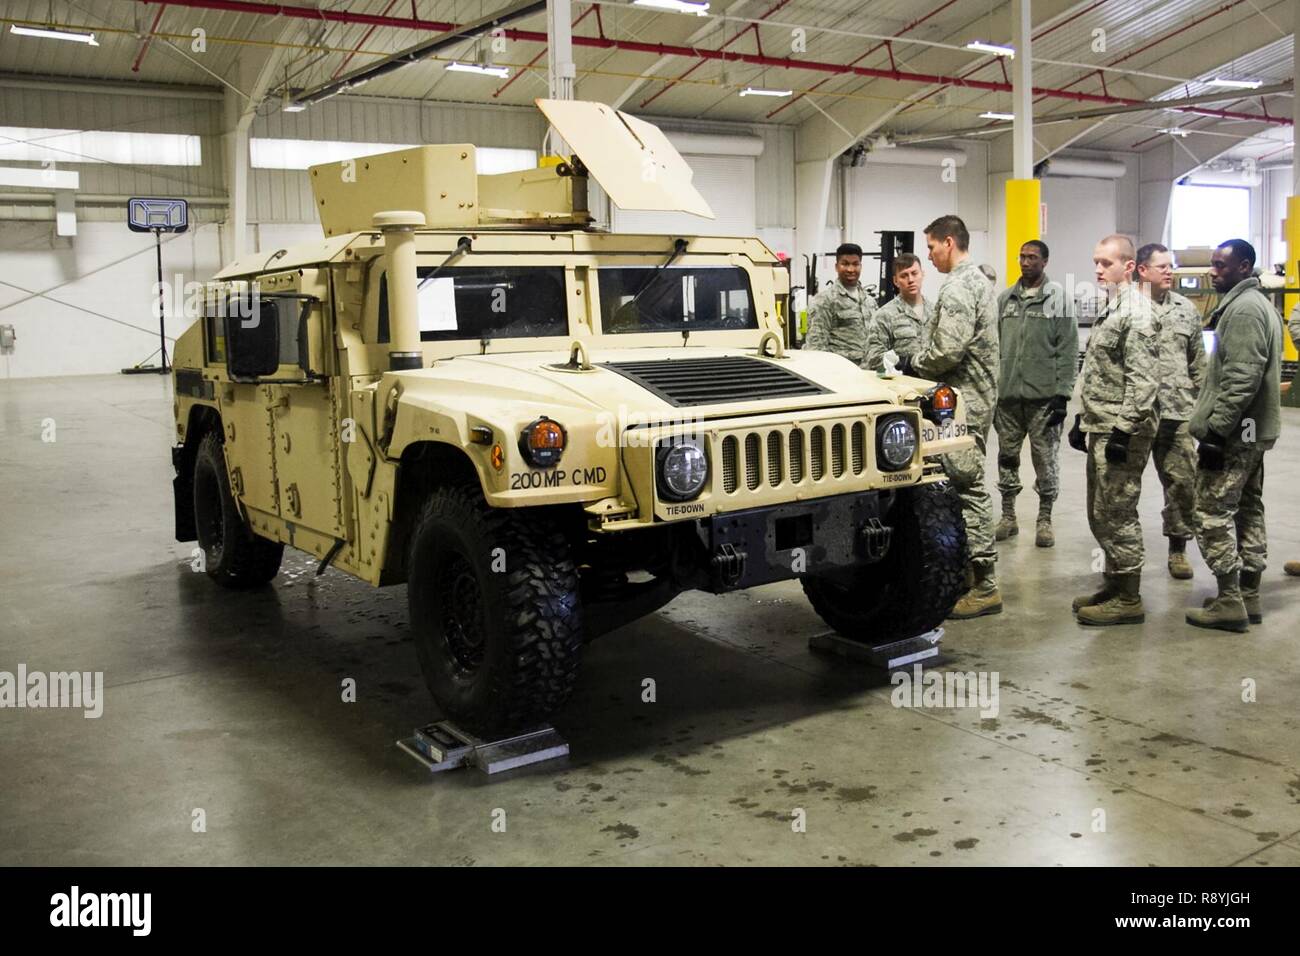 A U.S. Airmen prepare for a joint inspection an up-armored Humvee at Joint Base McGuire-Dix-Lakehurst, N.J., on March 18, 2017. The Airmen, who are assigned to the 621st Contingency Response Wing, spent the day with U.S. Army Reserve Soldiers from the 200th Military Police Command to inspect their up-armored Humvees in preparation for an air-land mission into Lakehurst Maxfield Field to kick off the ground operations of Warrior Exercise 78-17-01, which will be held March 8 to April 1, 2017. Roughly 60 units from the Army Reserve, Army, Air Force, Marine Reserves, and Canadian Armed Forces part Stock Photo